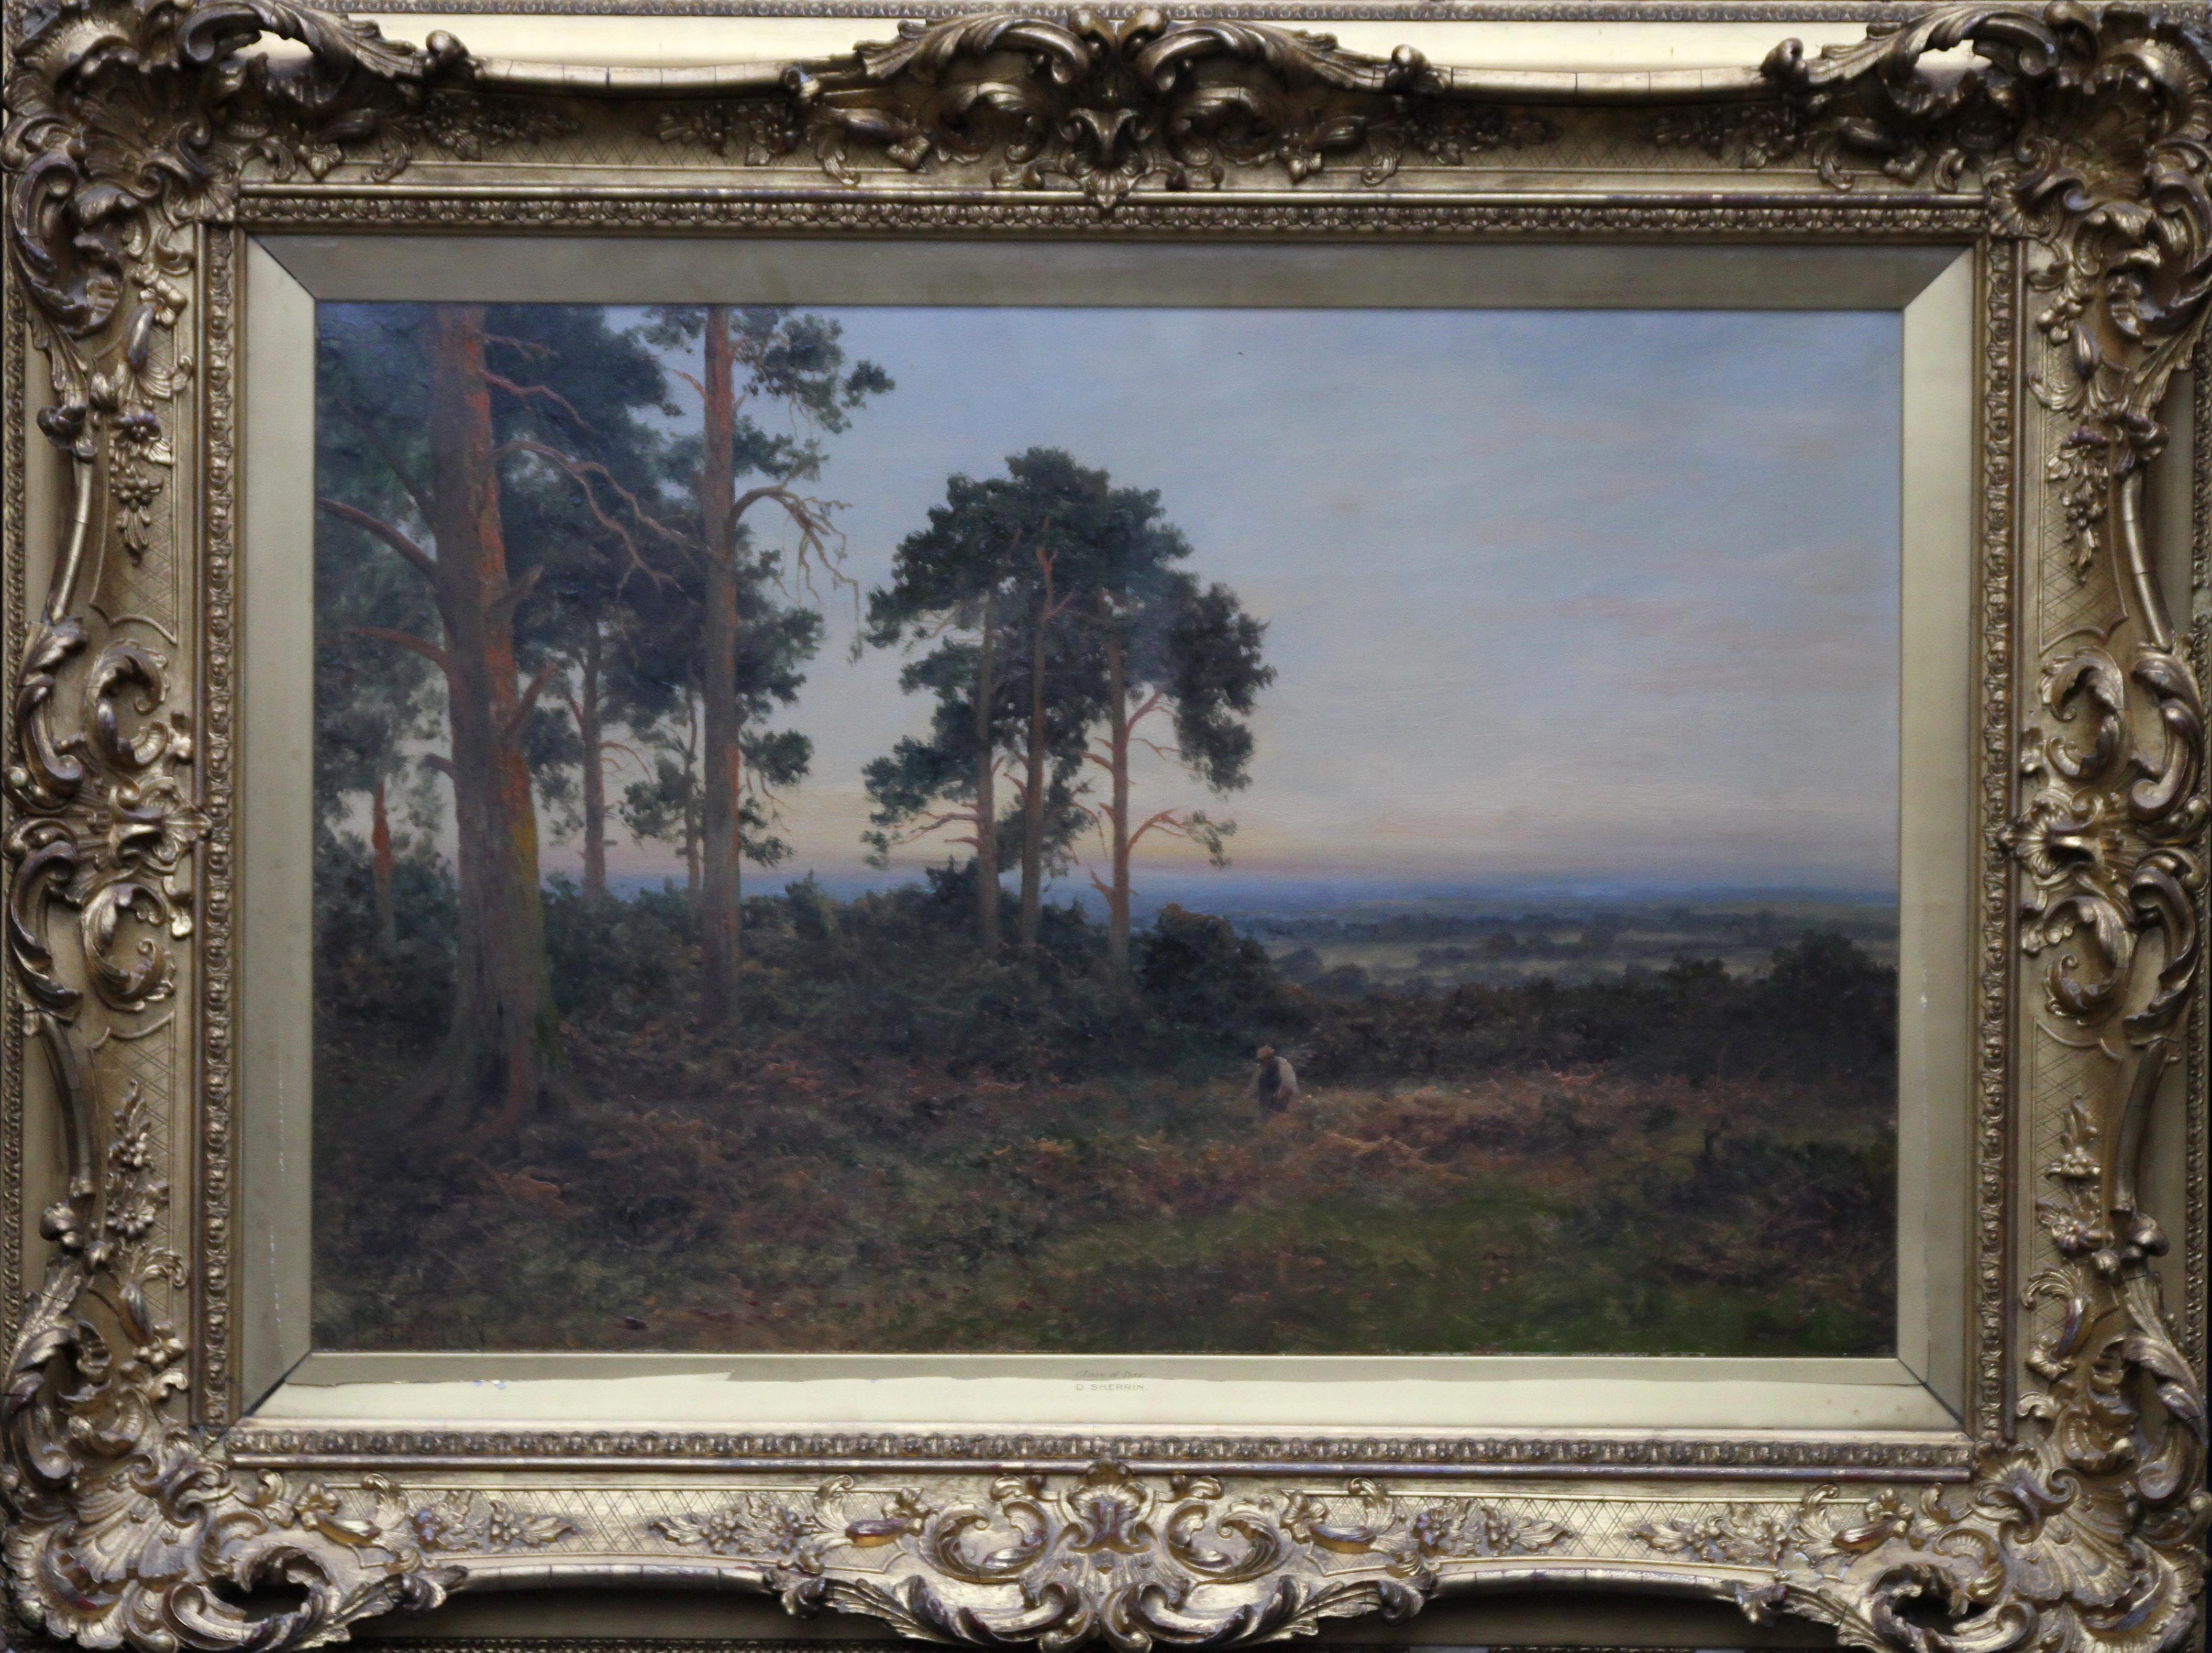 Daniel Sherrin Landscape Painting - Close of Day - British 1900 Victorian art pine trees landscape oil painting 